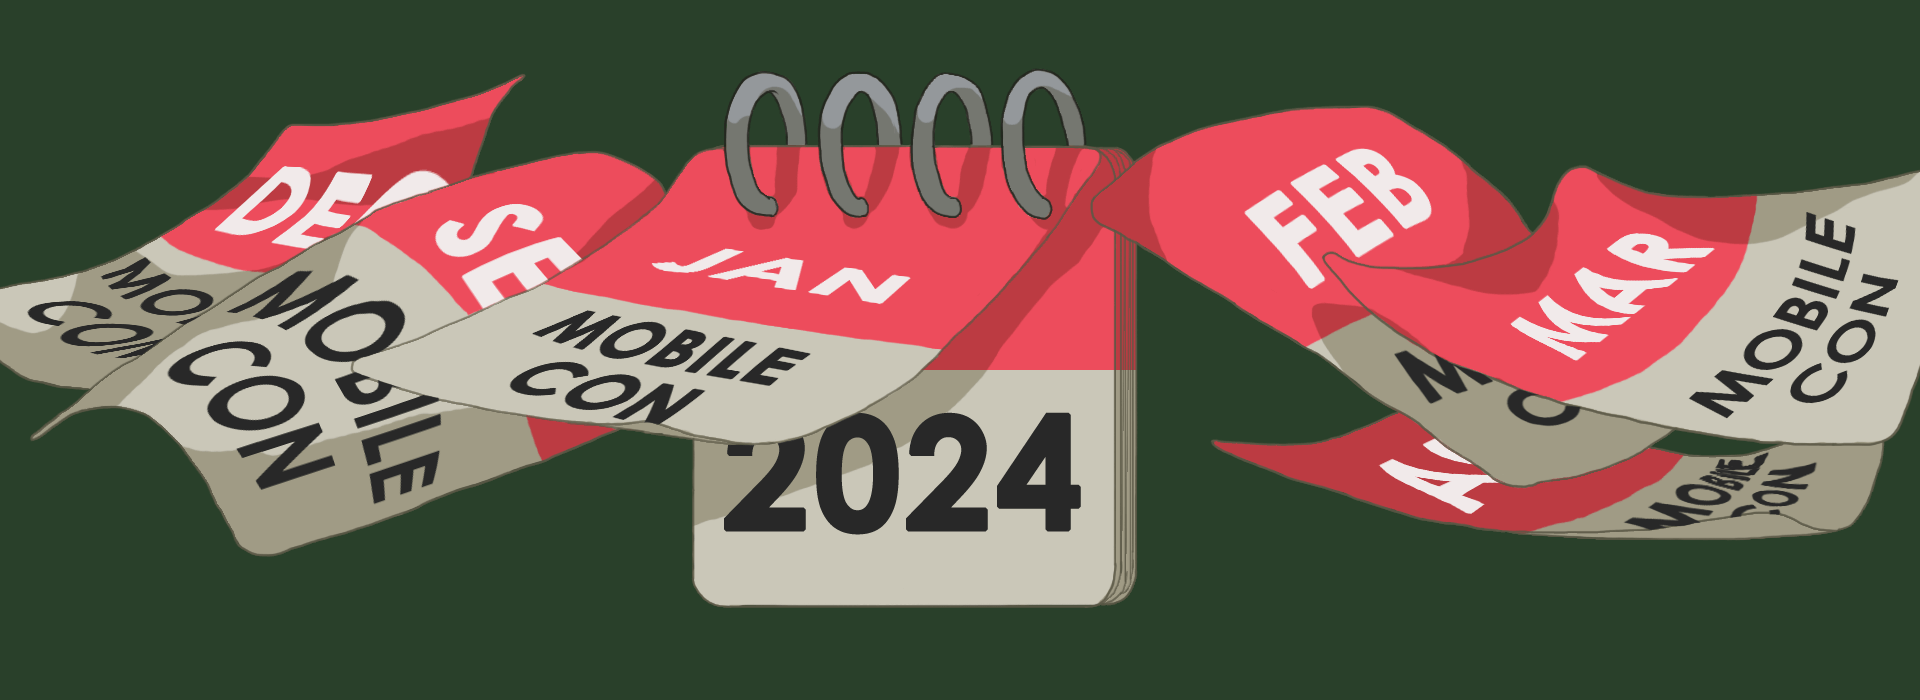 27 Mobile App Conferences to Attend in 2024